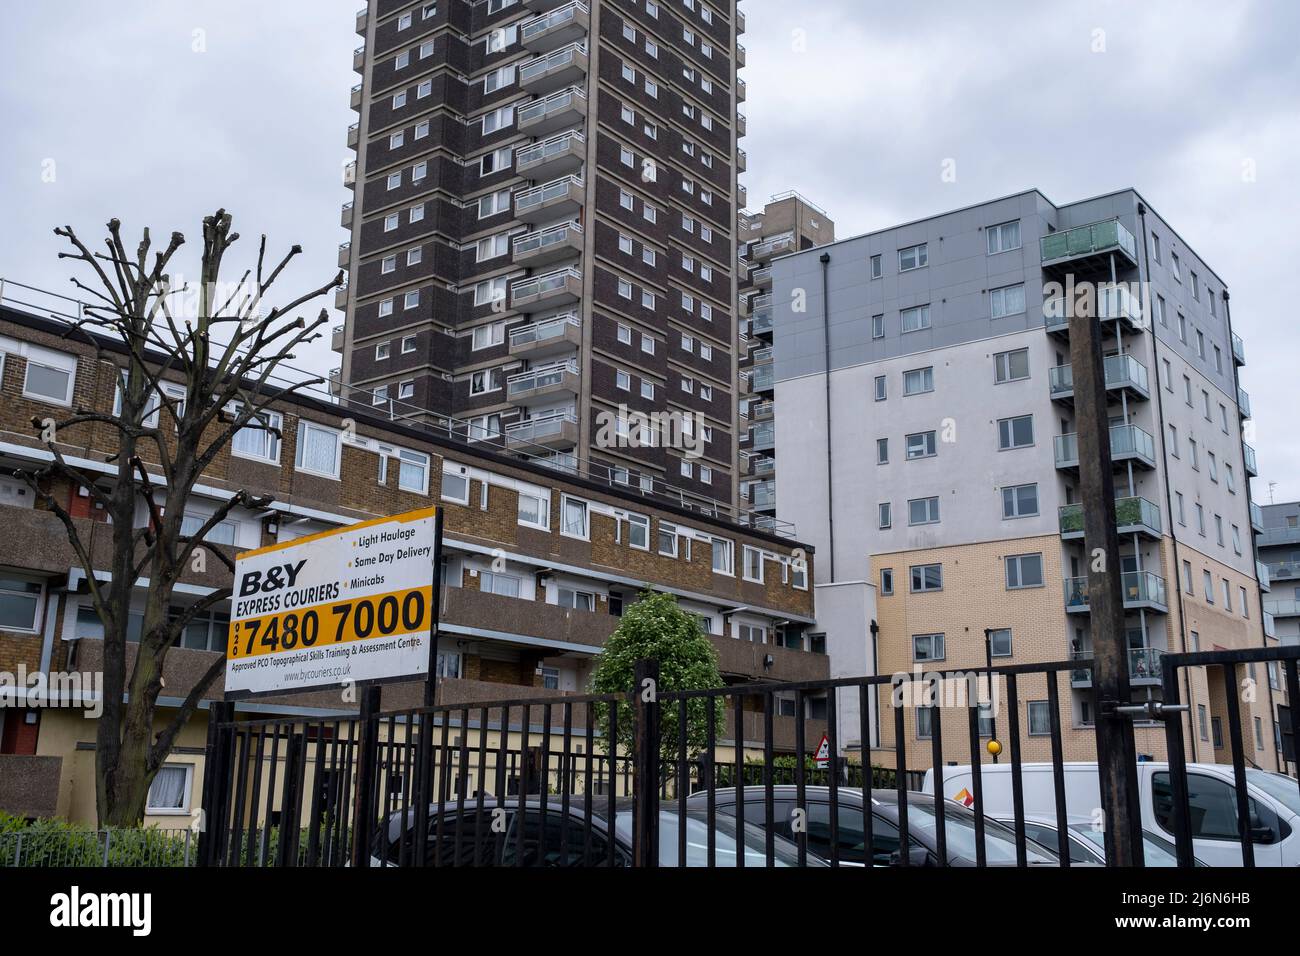 Social housing tower blocks in the Whitechapel / Shadwell border area on 27th April 2022 in London, United Kingdom. Council estates like this are very common all over the capital, and in particular in areas such as Tower Hamlets which is the most densely populated area in the London. Stock Photo